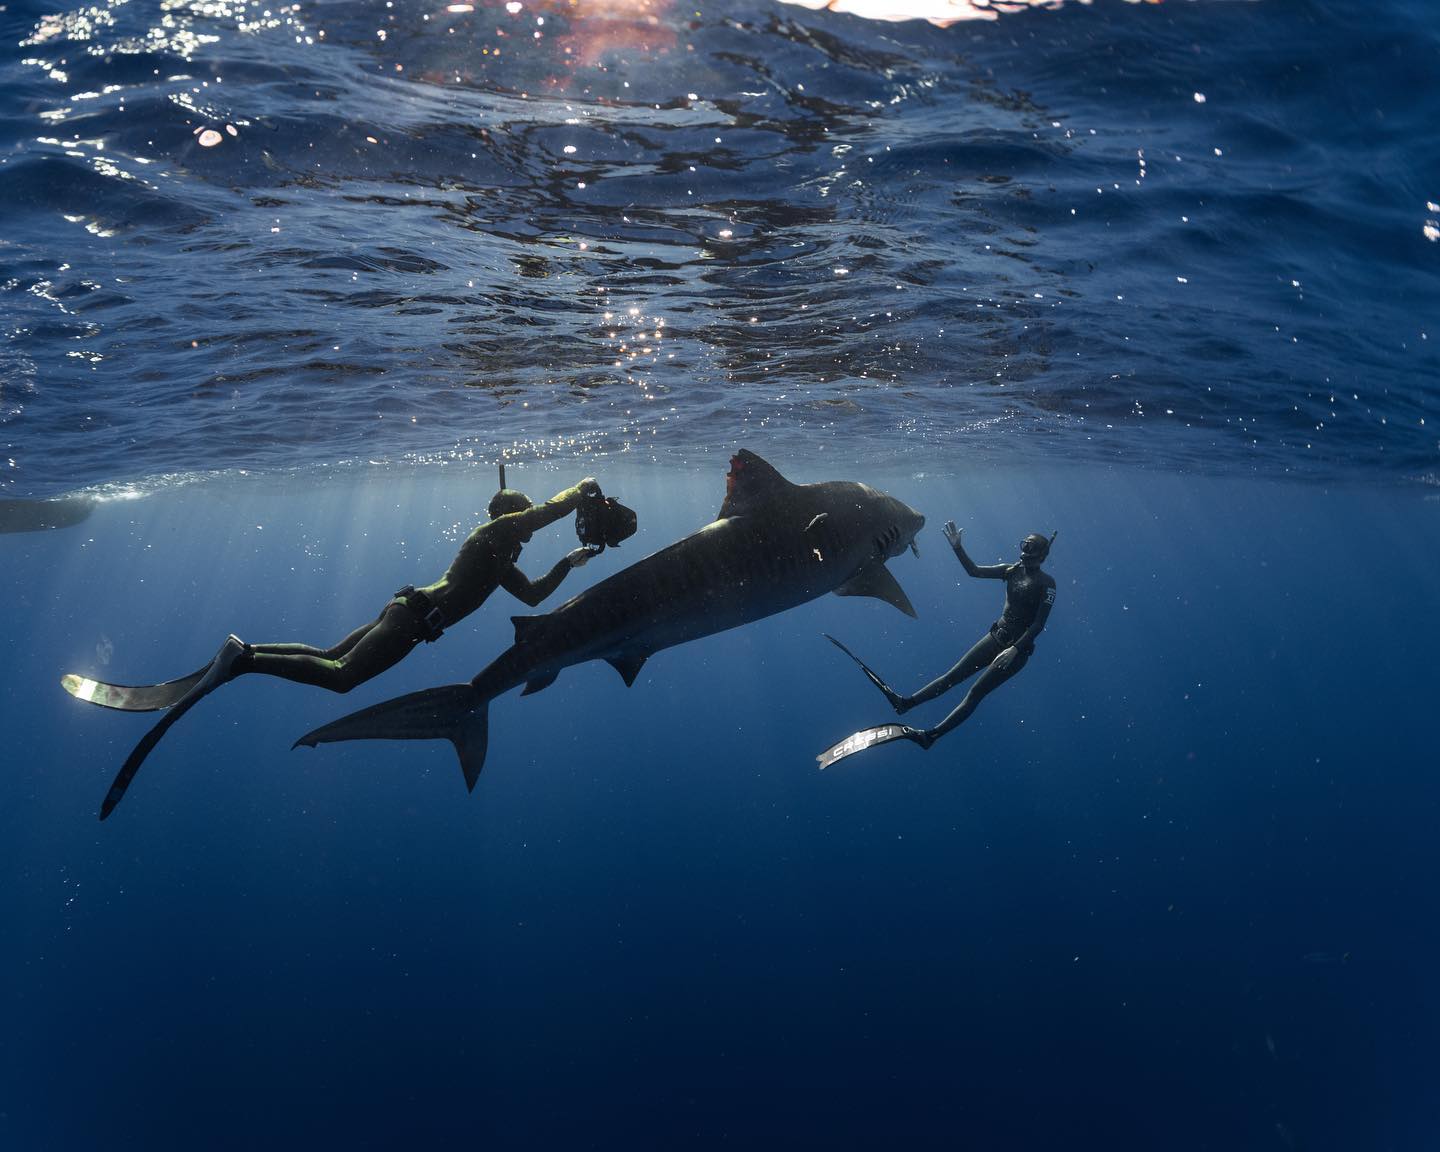 An incredible photo of hawaii adventure diving captian Sava and another diver swimming with a large tiger shark.